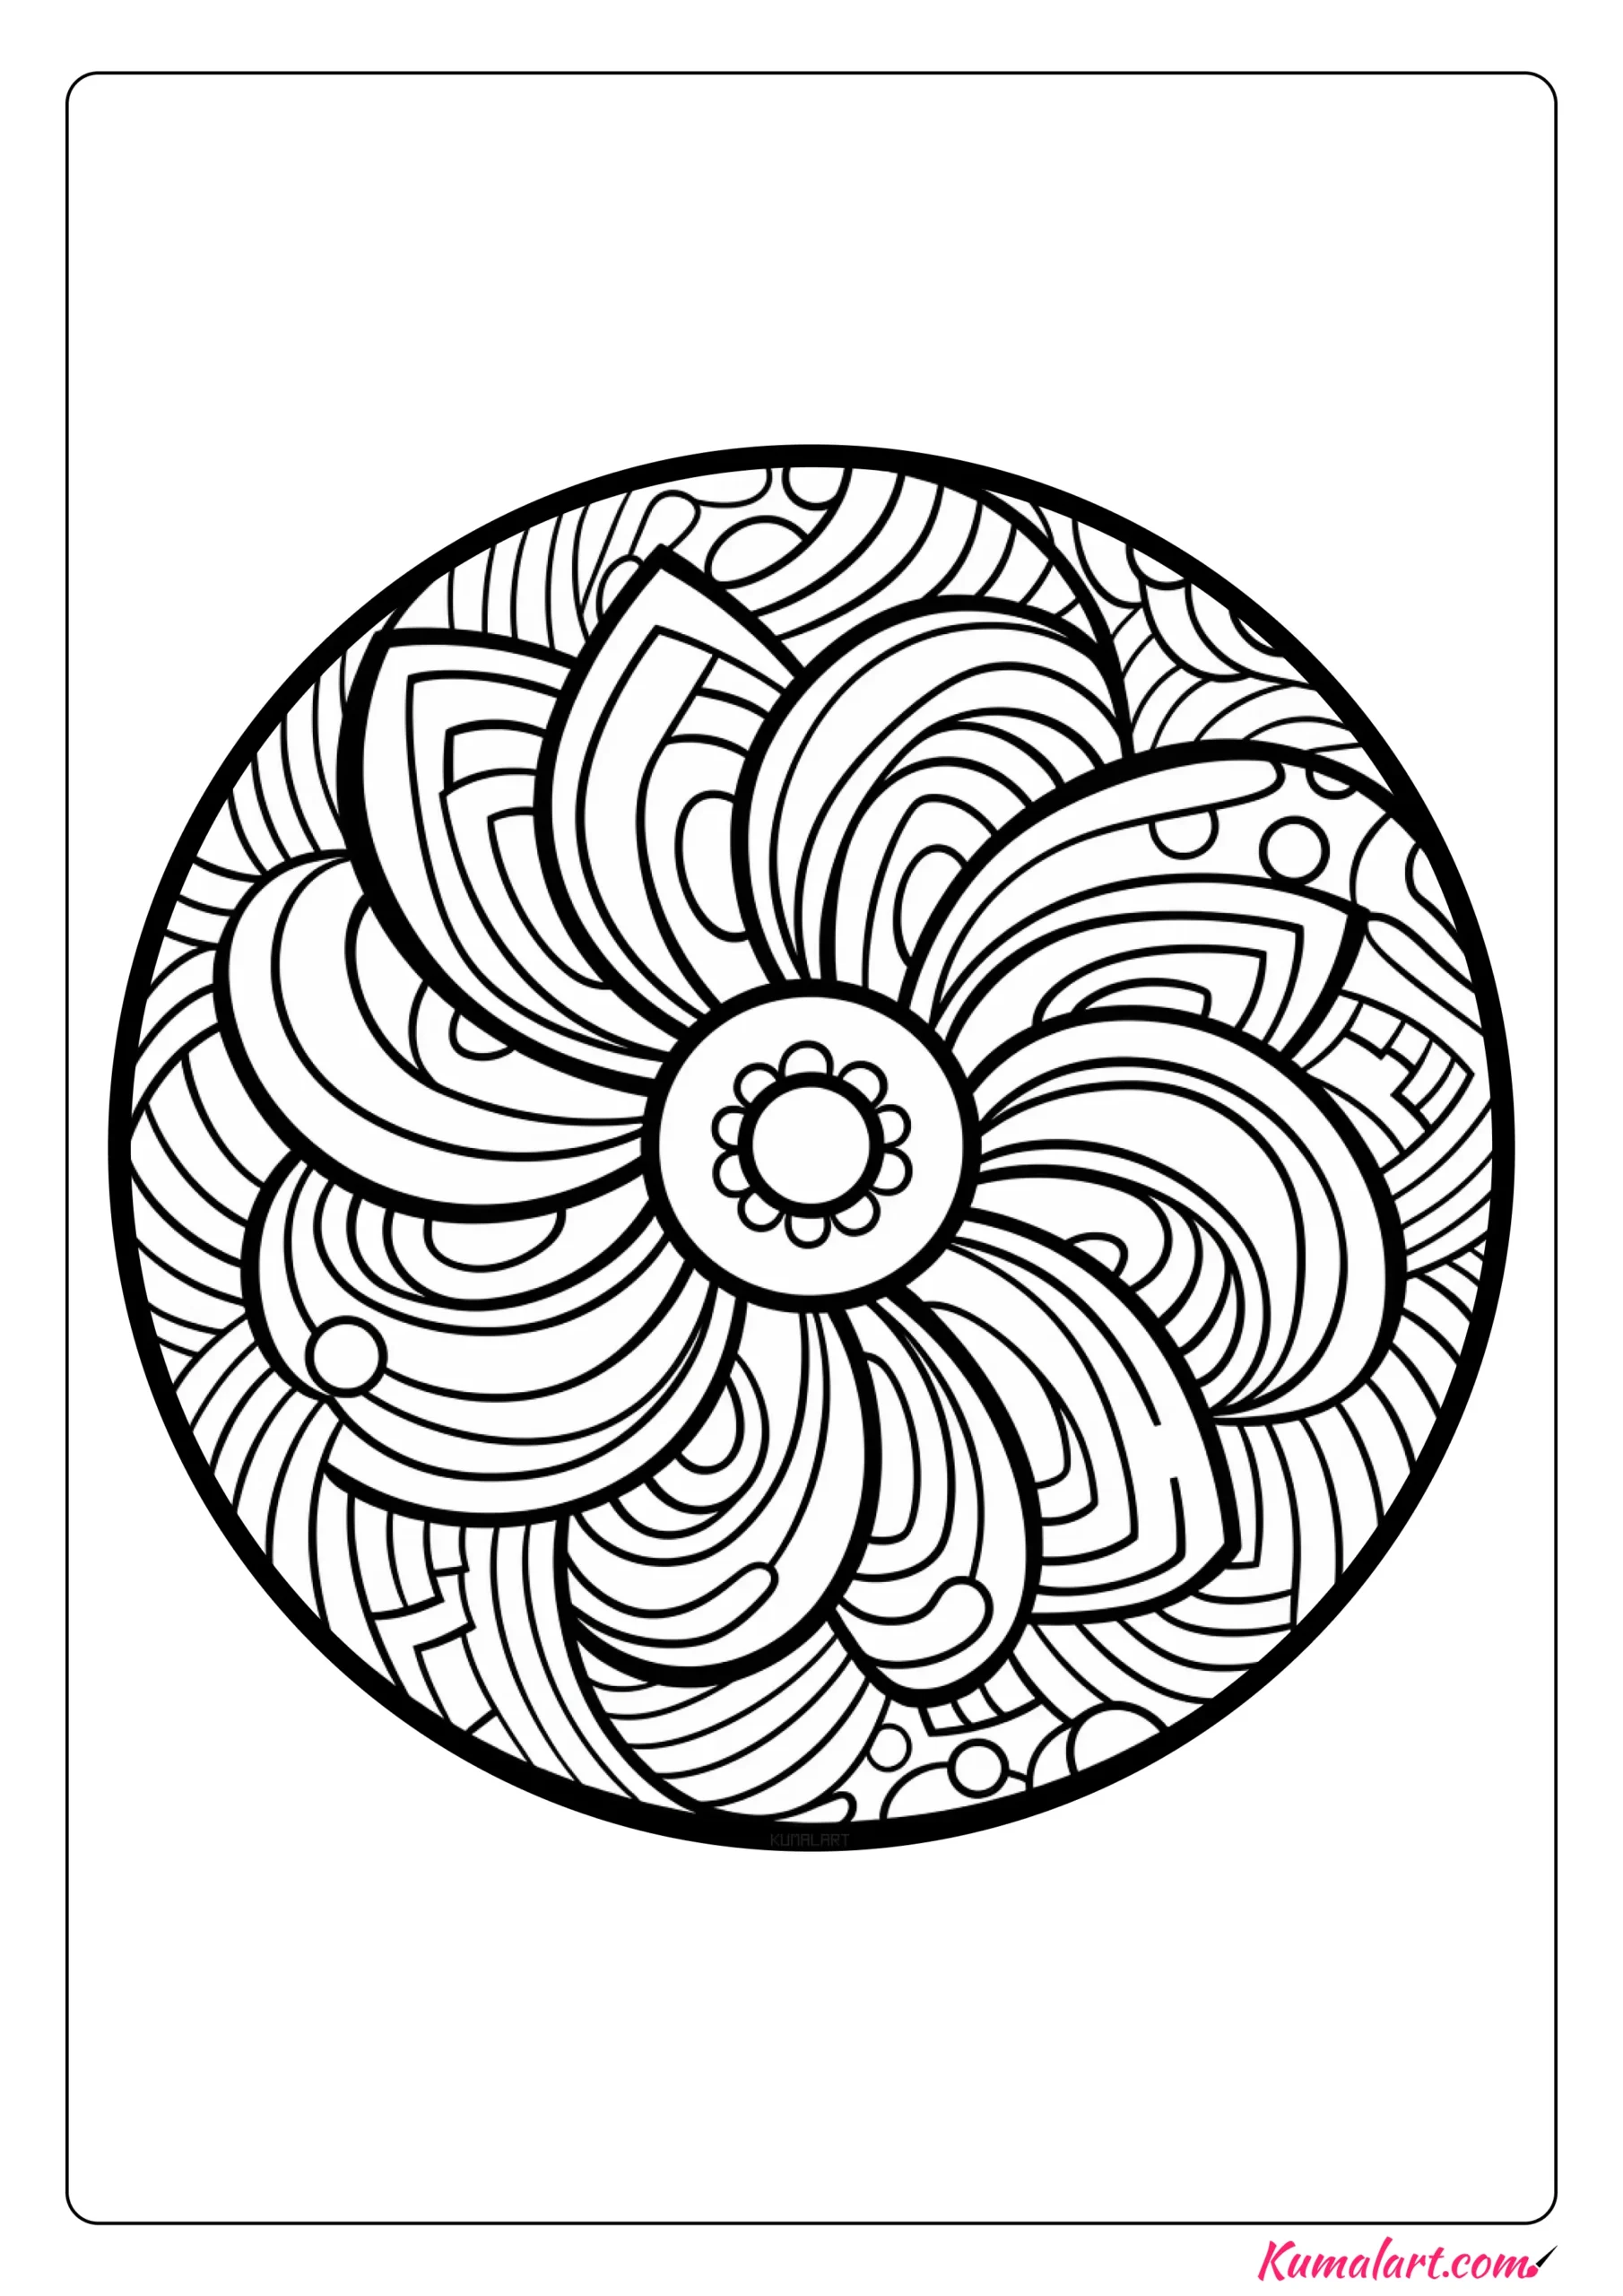 Comforting Therapeutic Coloring Page